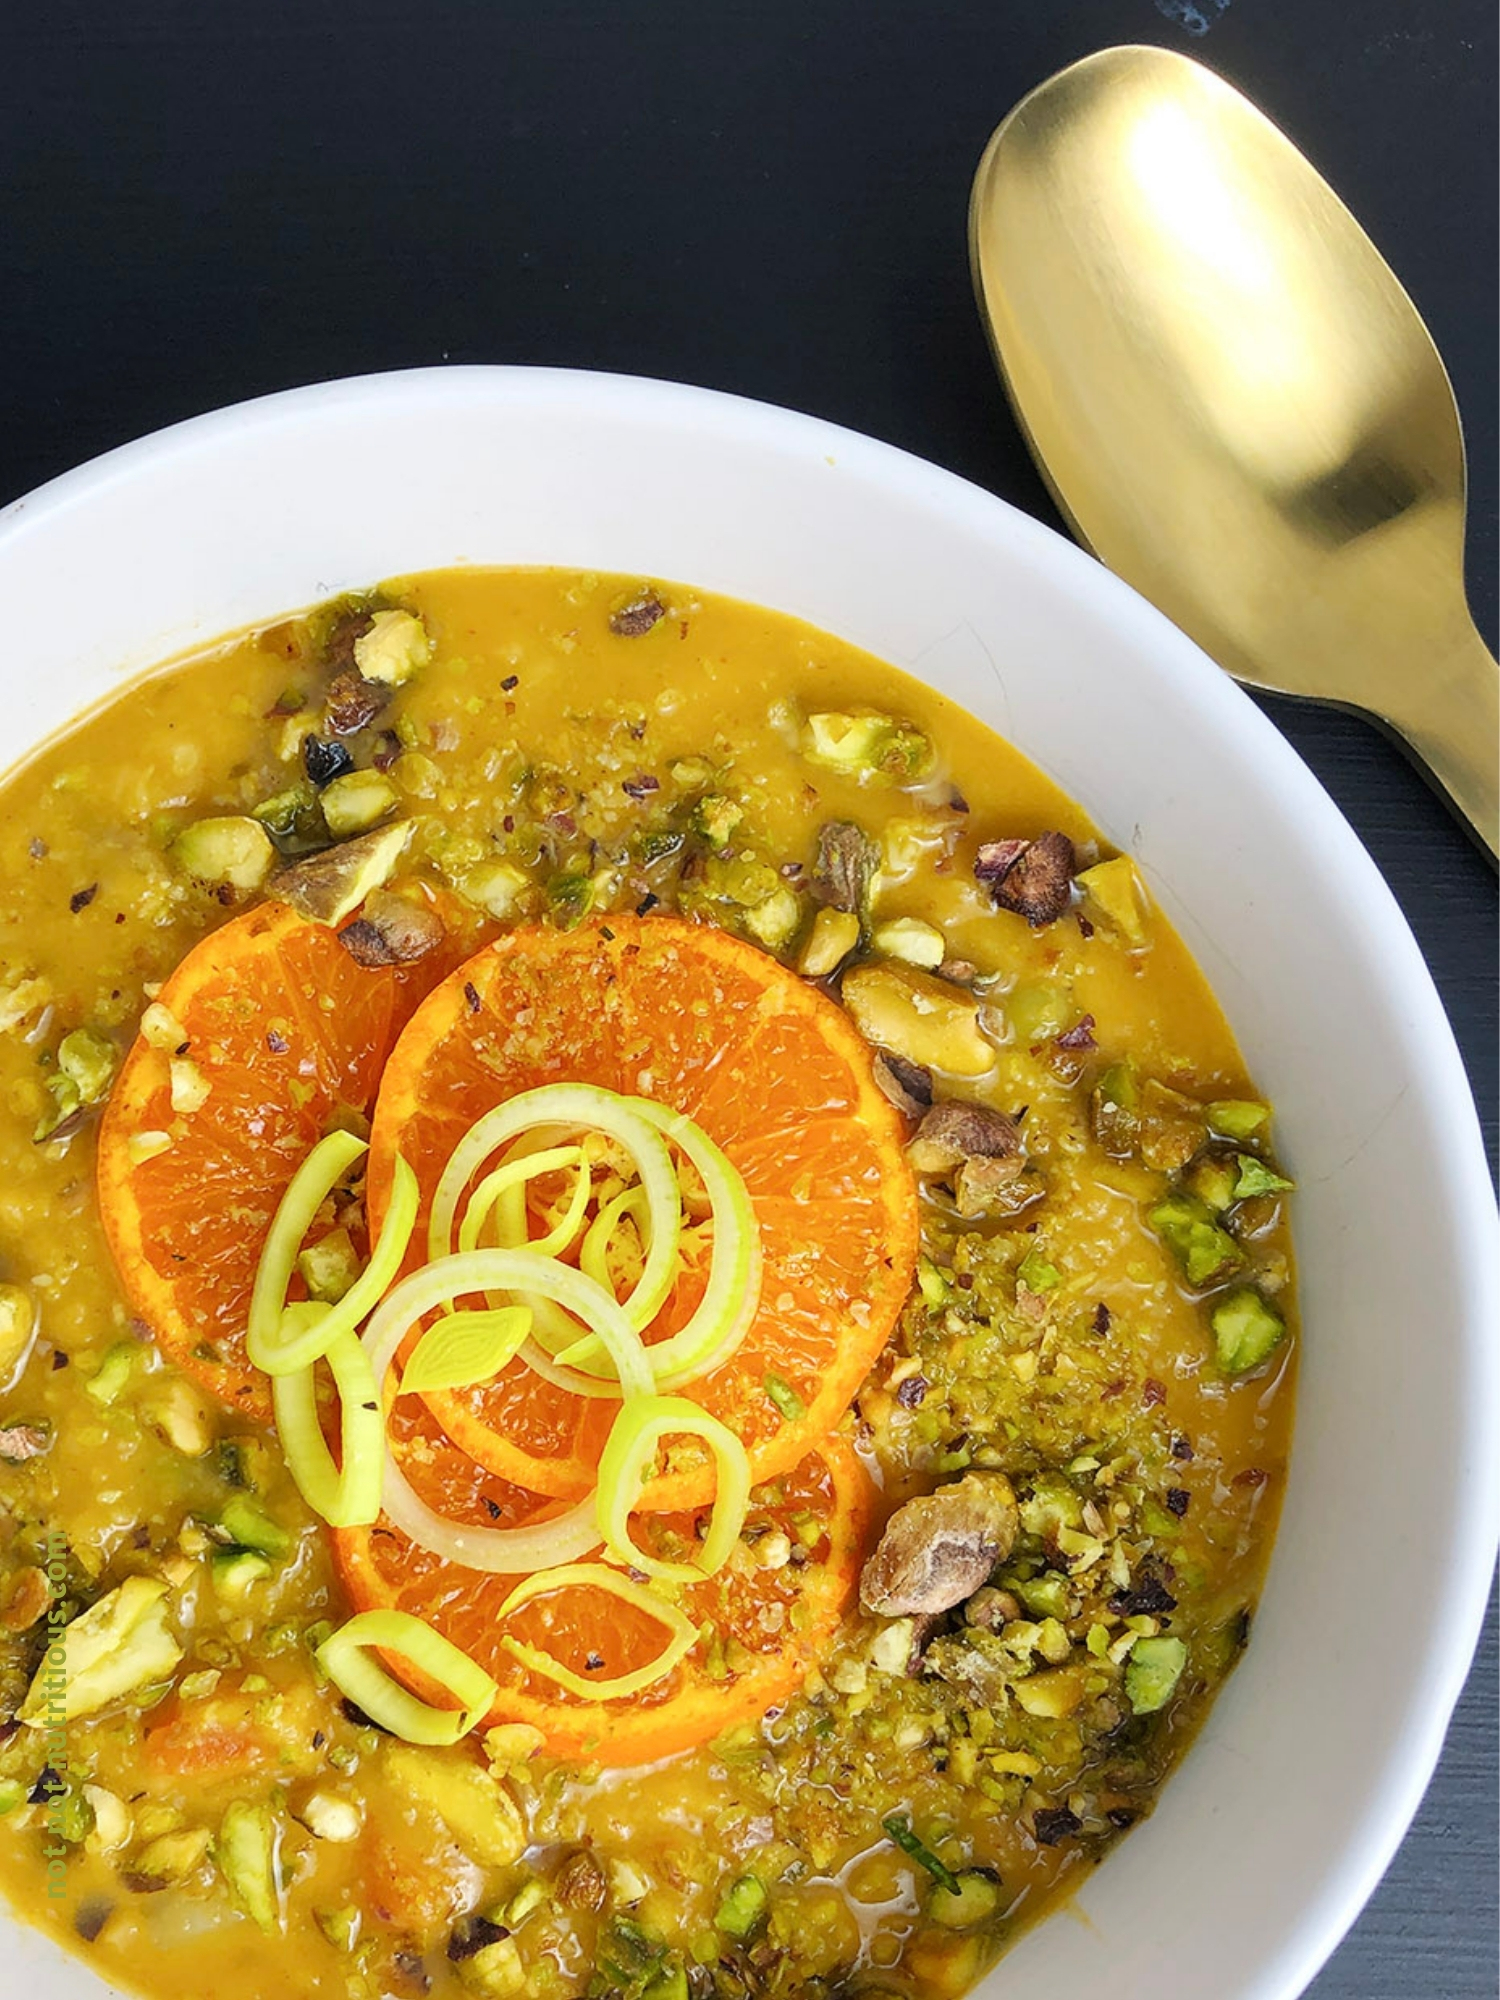 Photo is top-down close up image of white bowl of lentil soup. Soup is garnished with pistachios, orange slices, and leek slices.